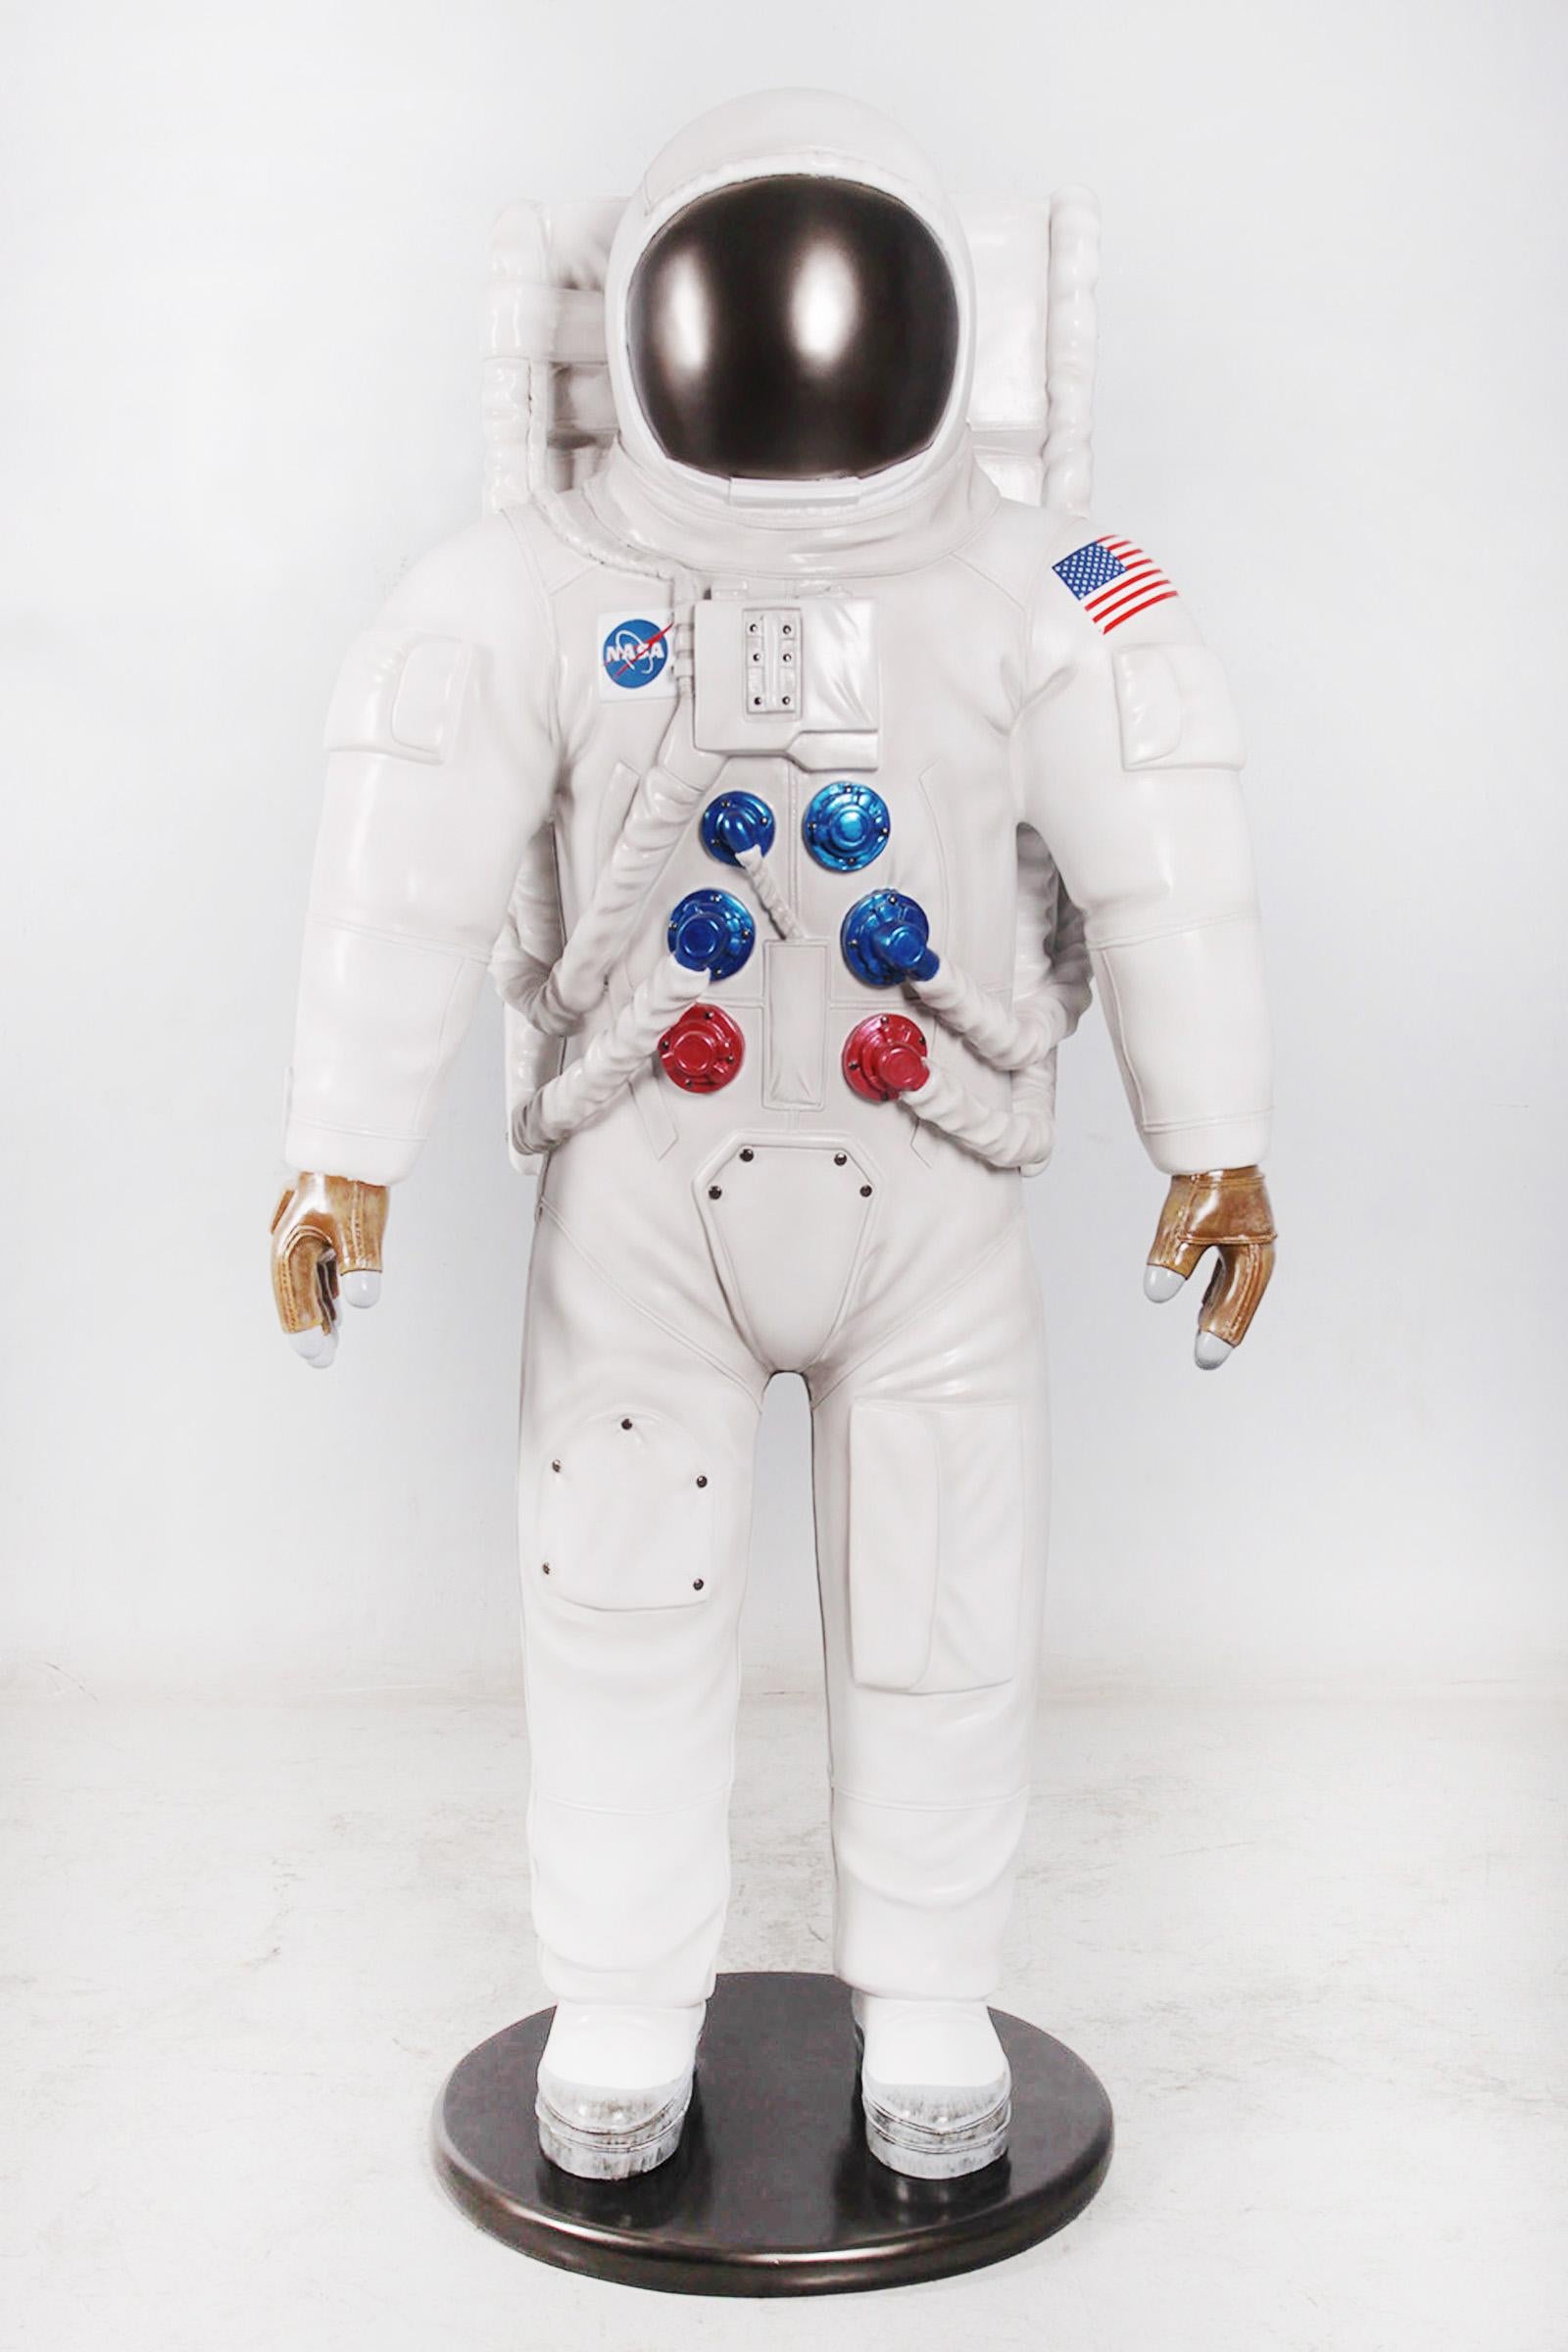 Sculpture life-size in Resin US Astronaut NASA.
Made in 2018.